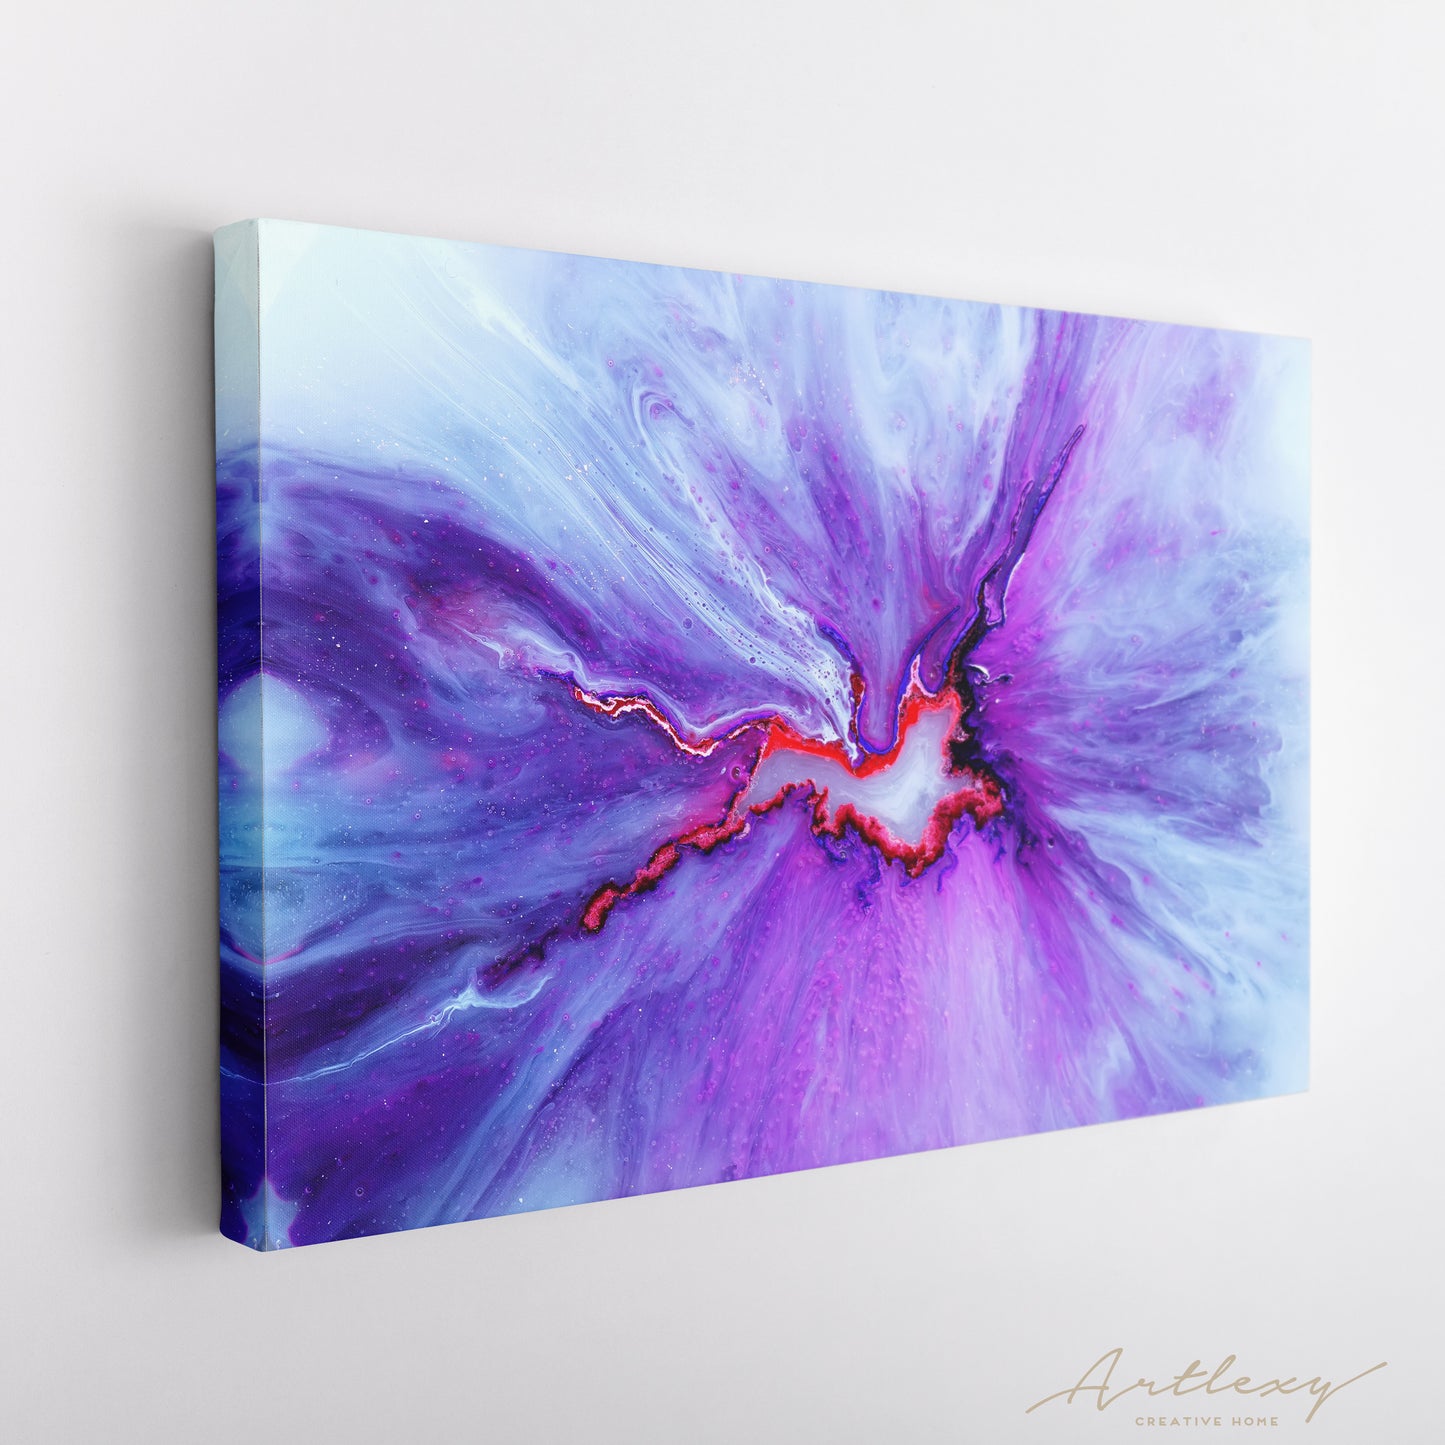 Abstract Purple Waves Canvas Print ArtLexy 1 Panel 24"x16" inches 